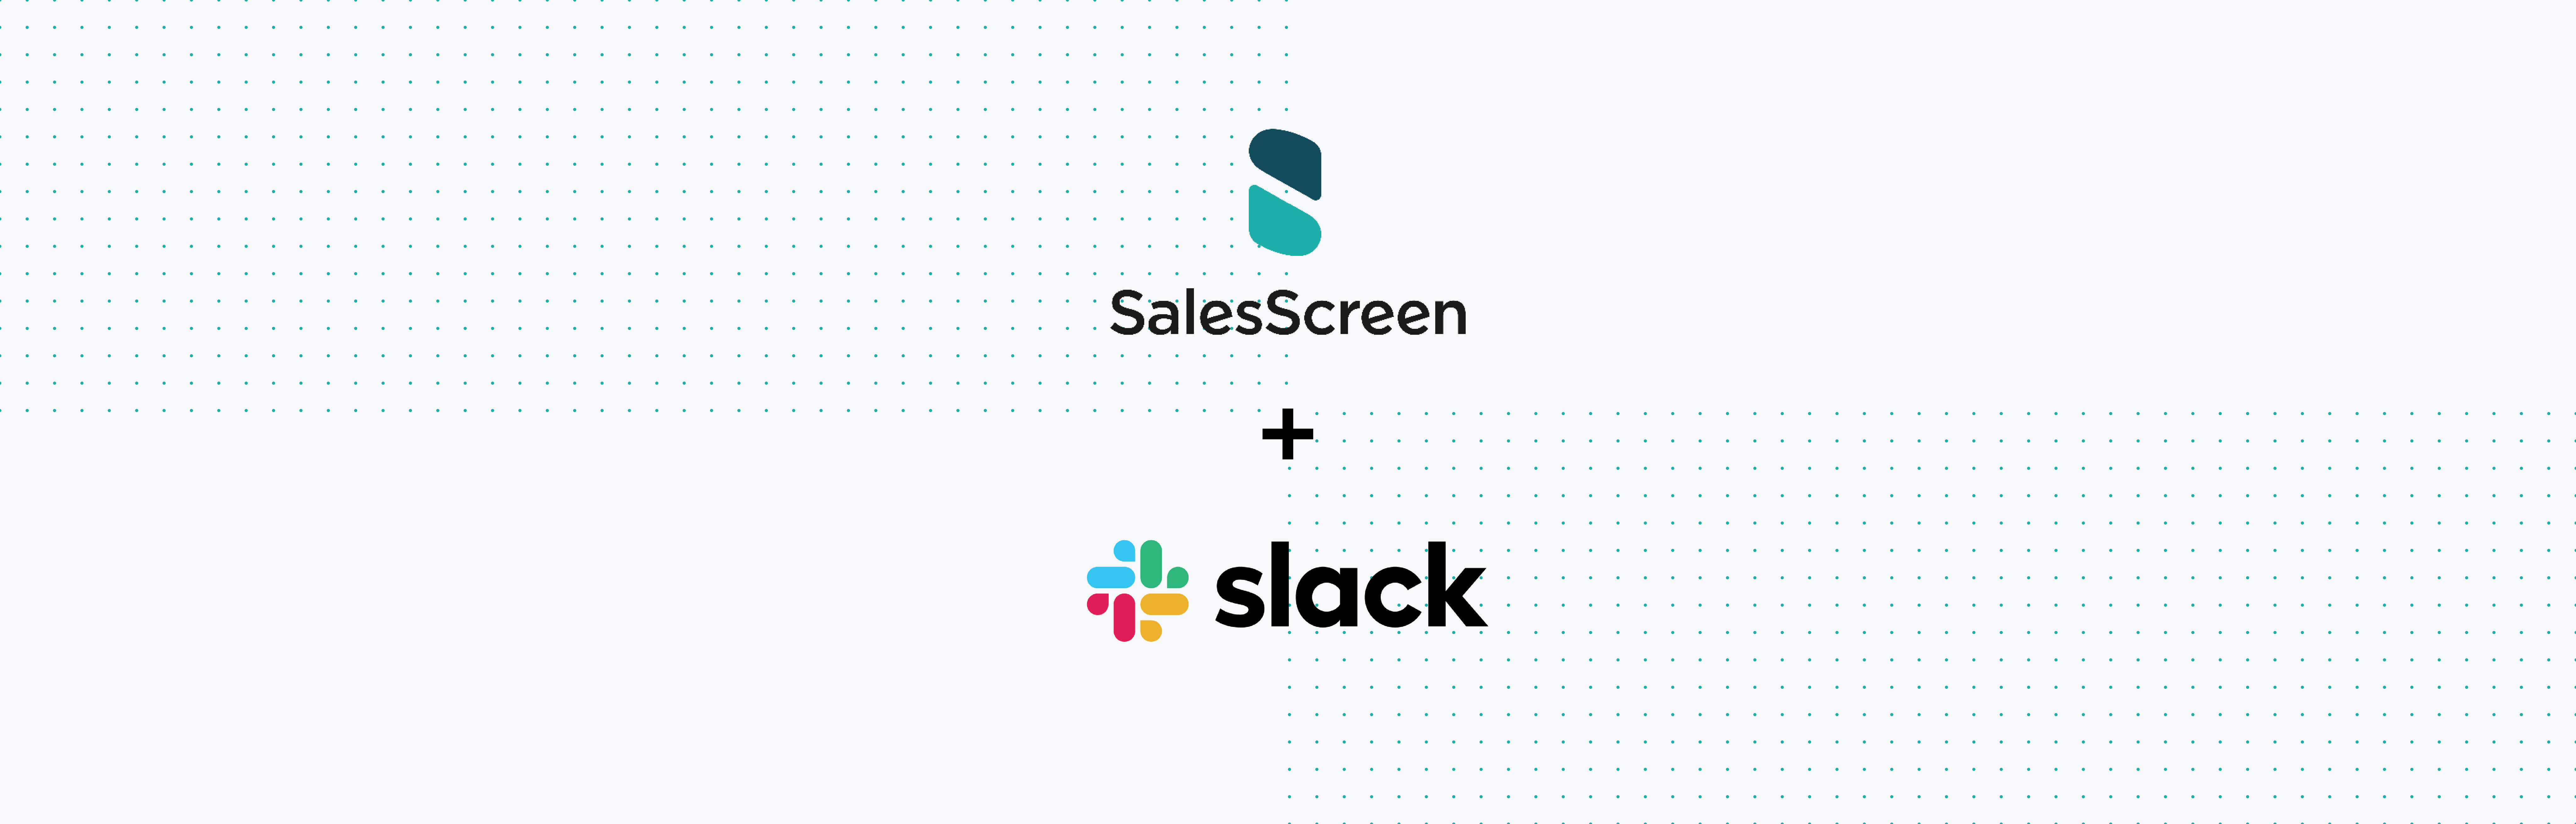 SalesScreen Now Integrates with Slack!!! A Match Made in Heaven <3